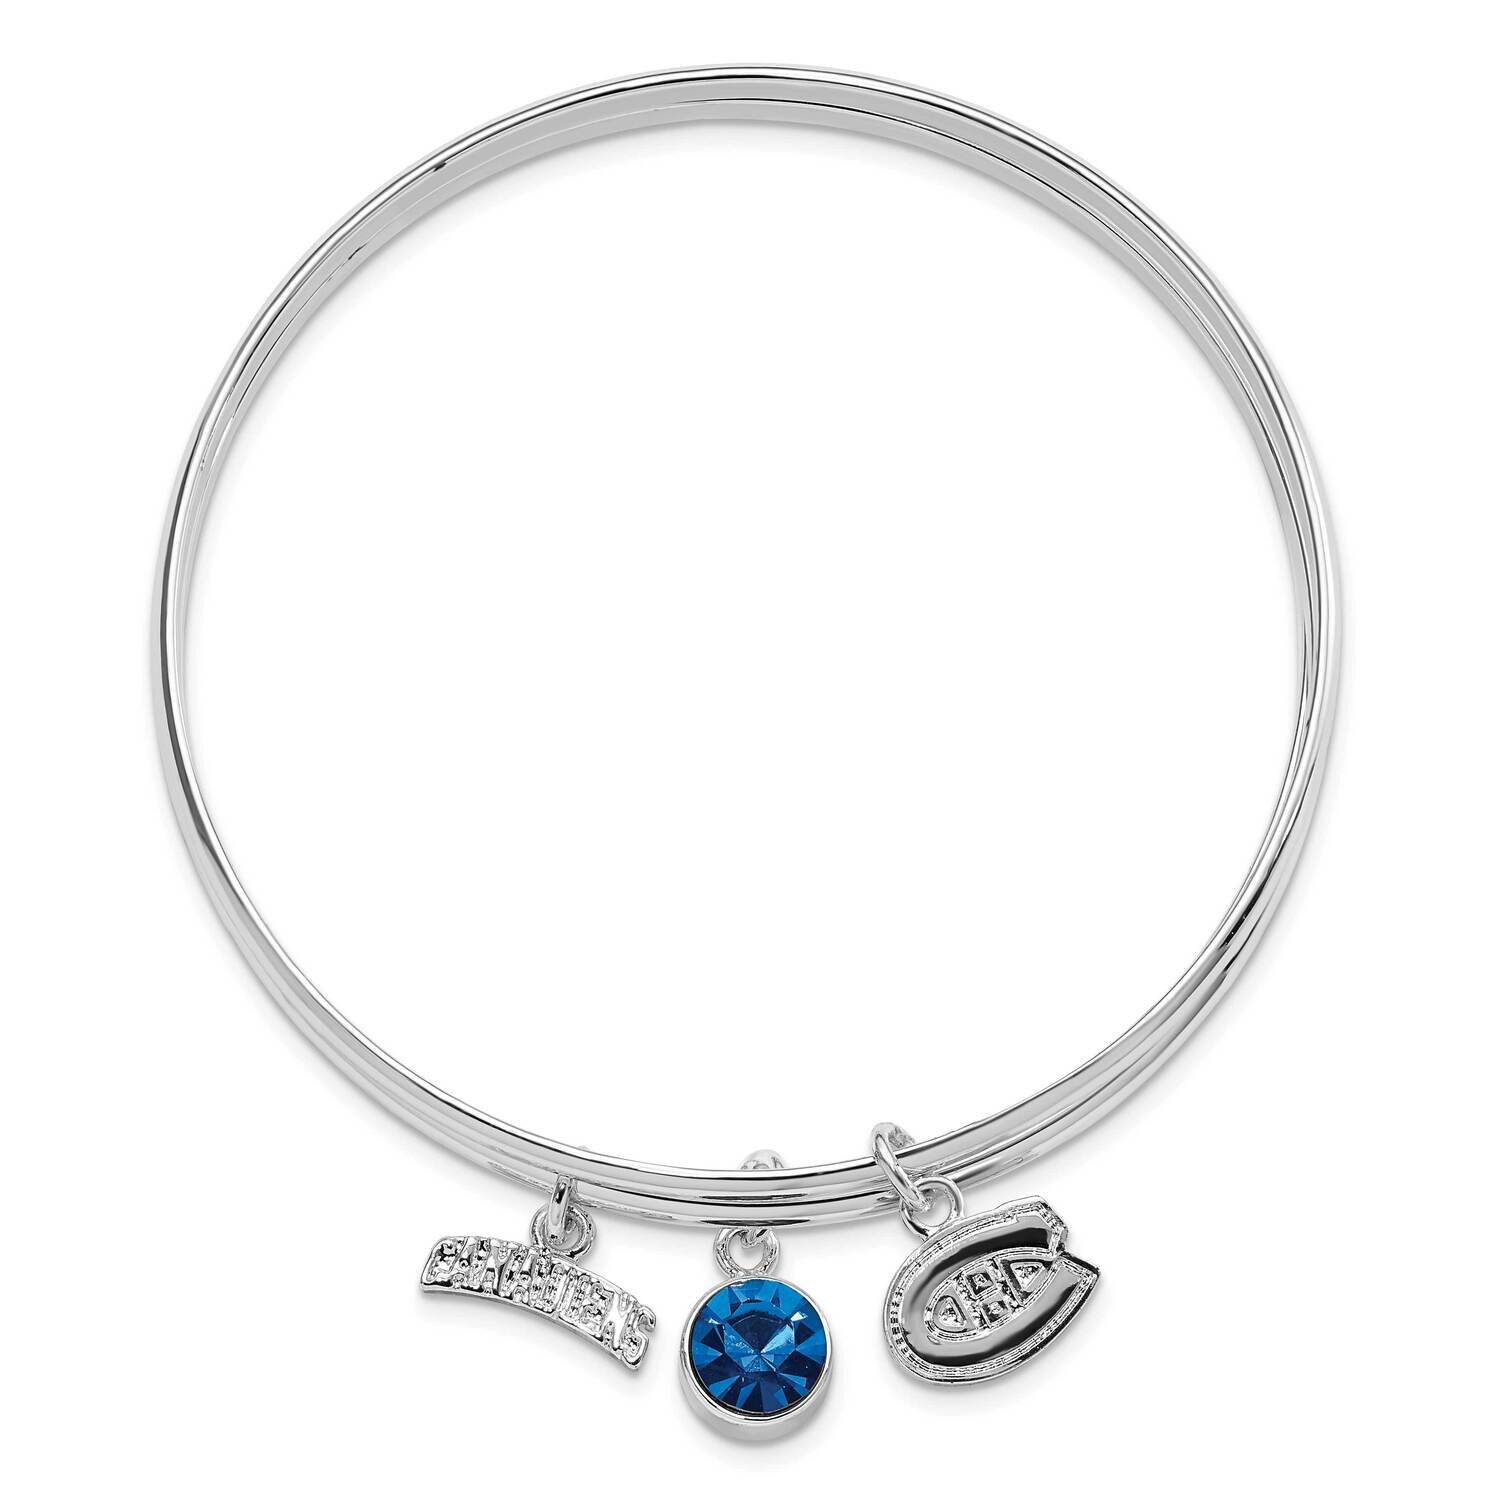 NHL Montreal Canadiens Crystal 3 pc Charm Bangle Set Silver-tone CANTBB